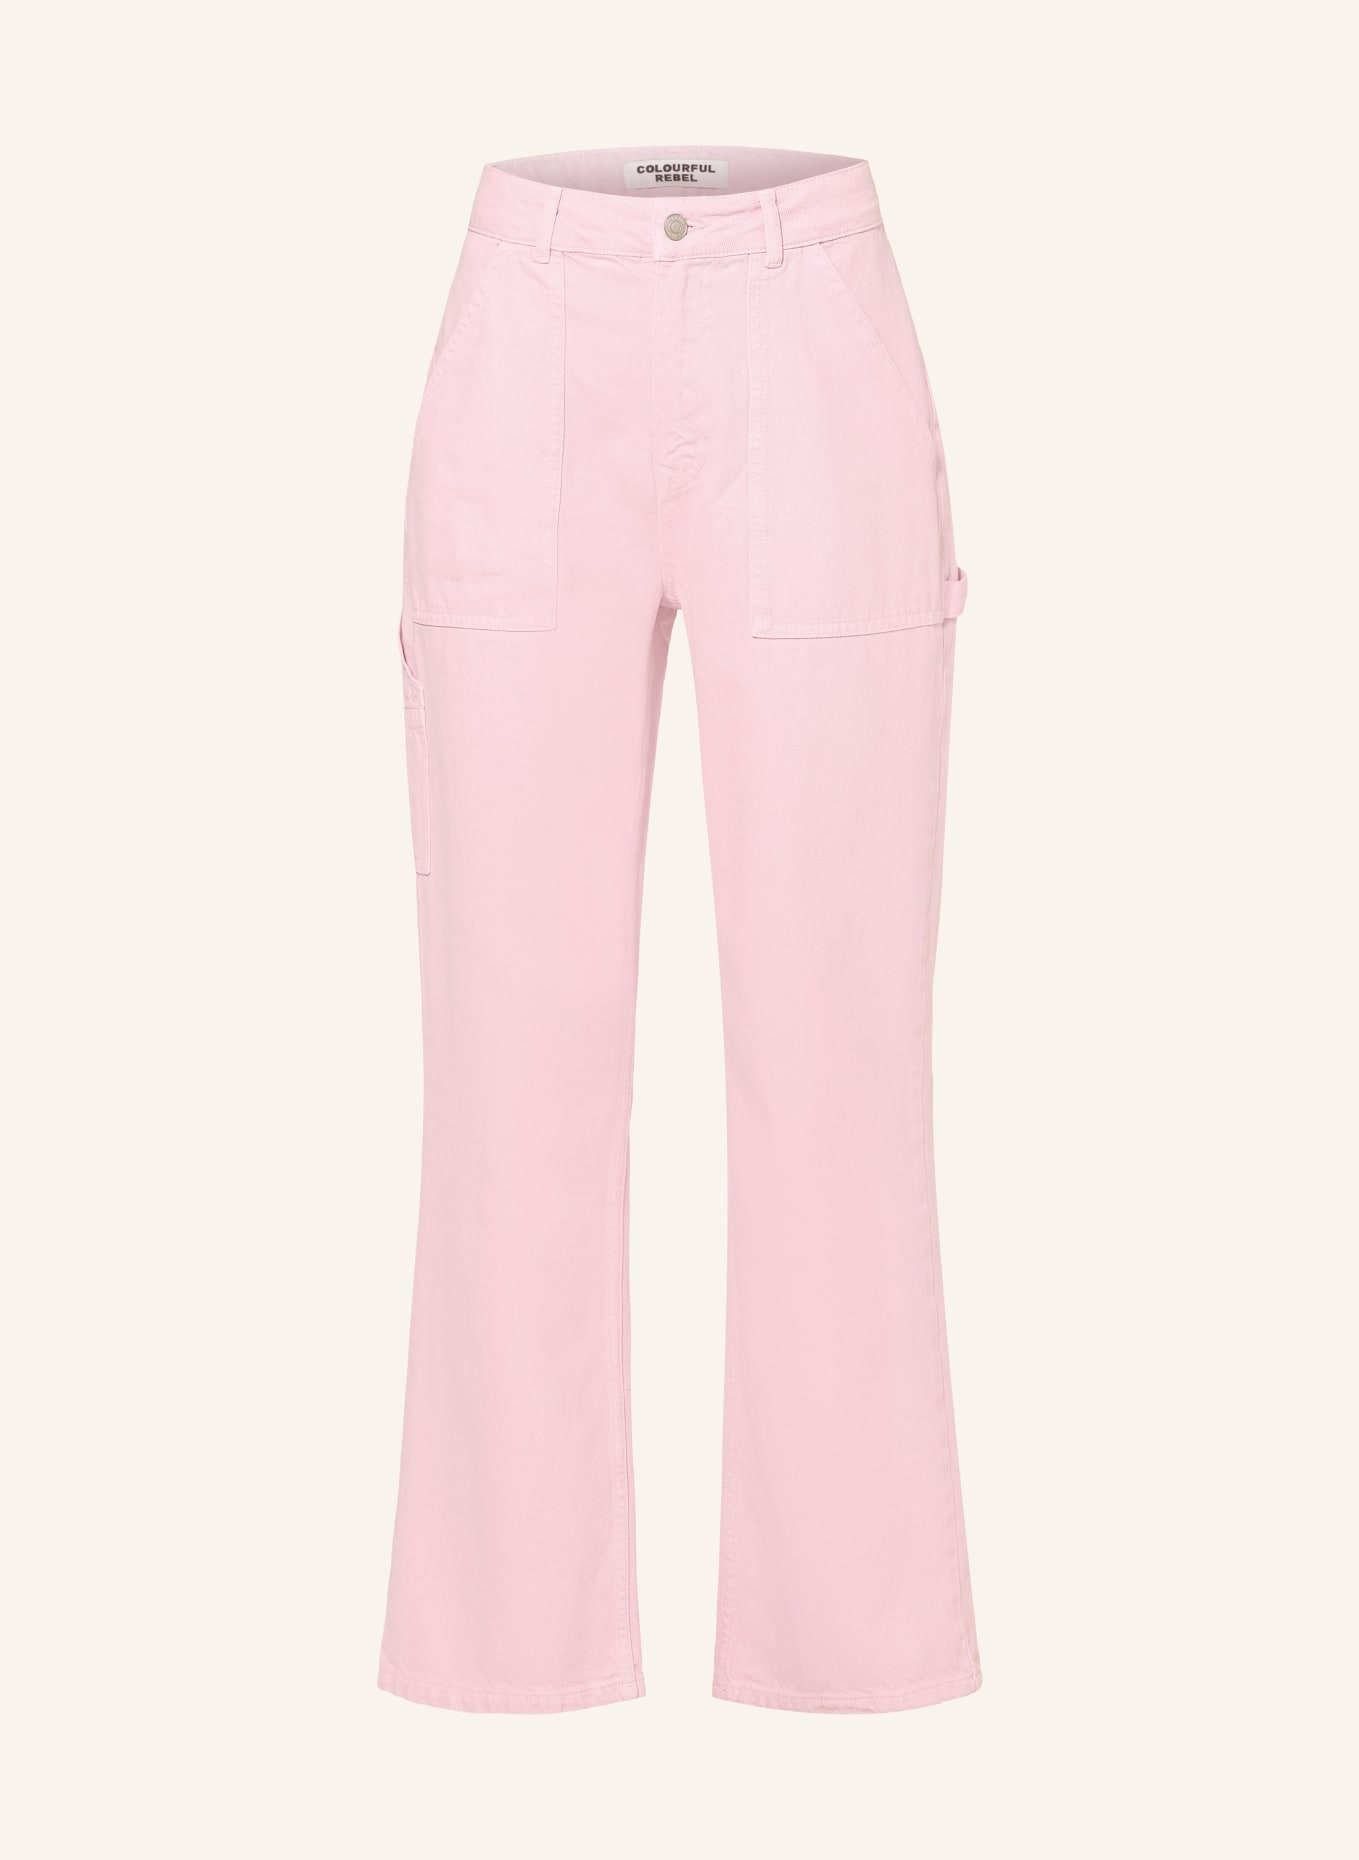 COLOURFUL REBEL Straight Jeans TINSLEY, Farbe: PINK (Bild 1)